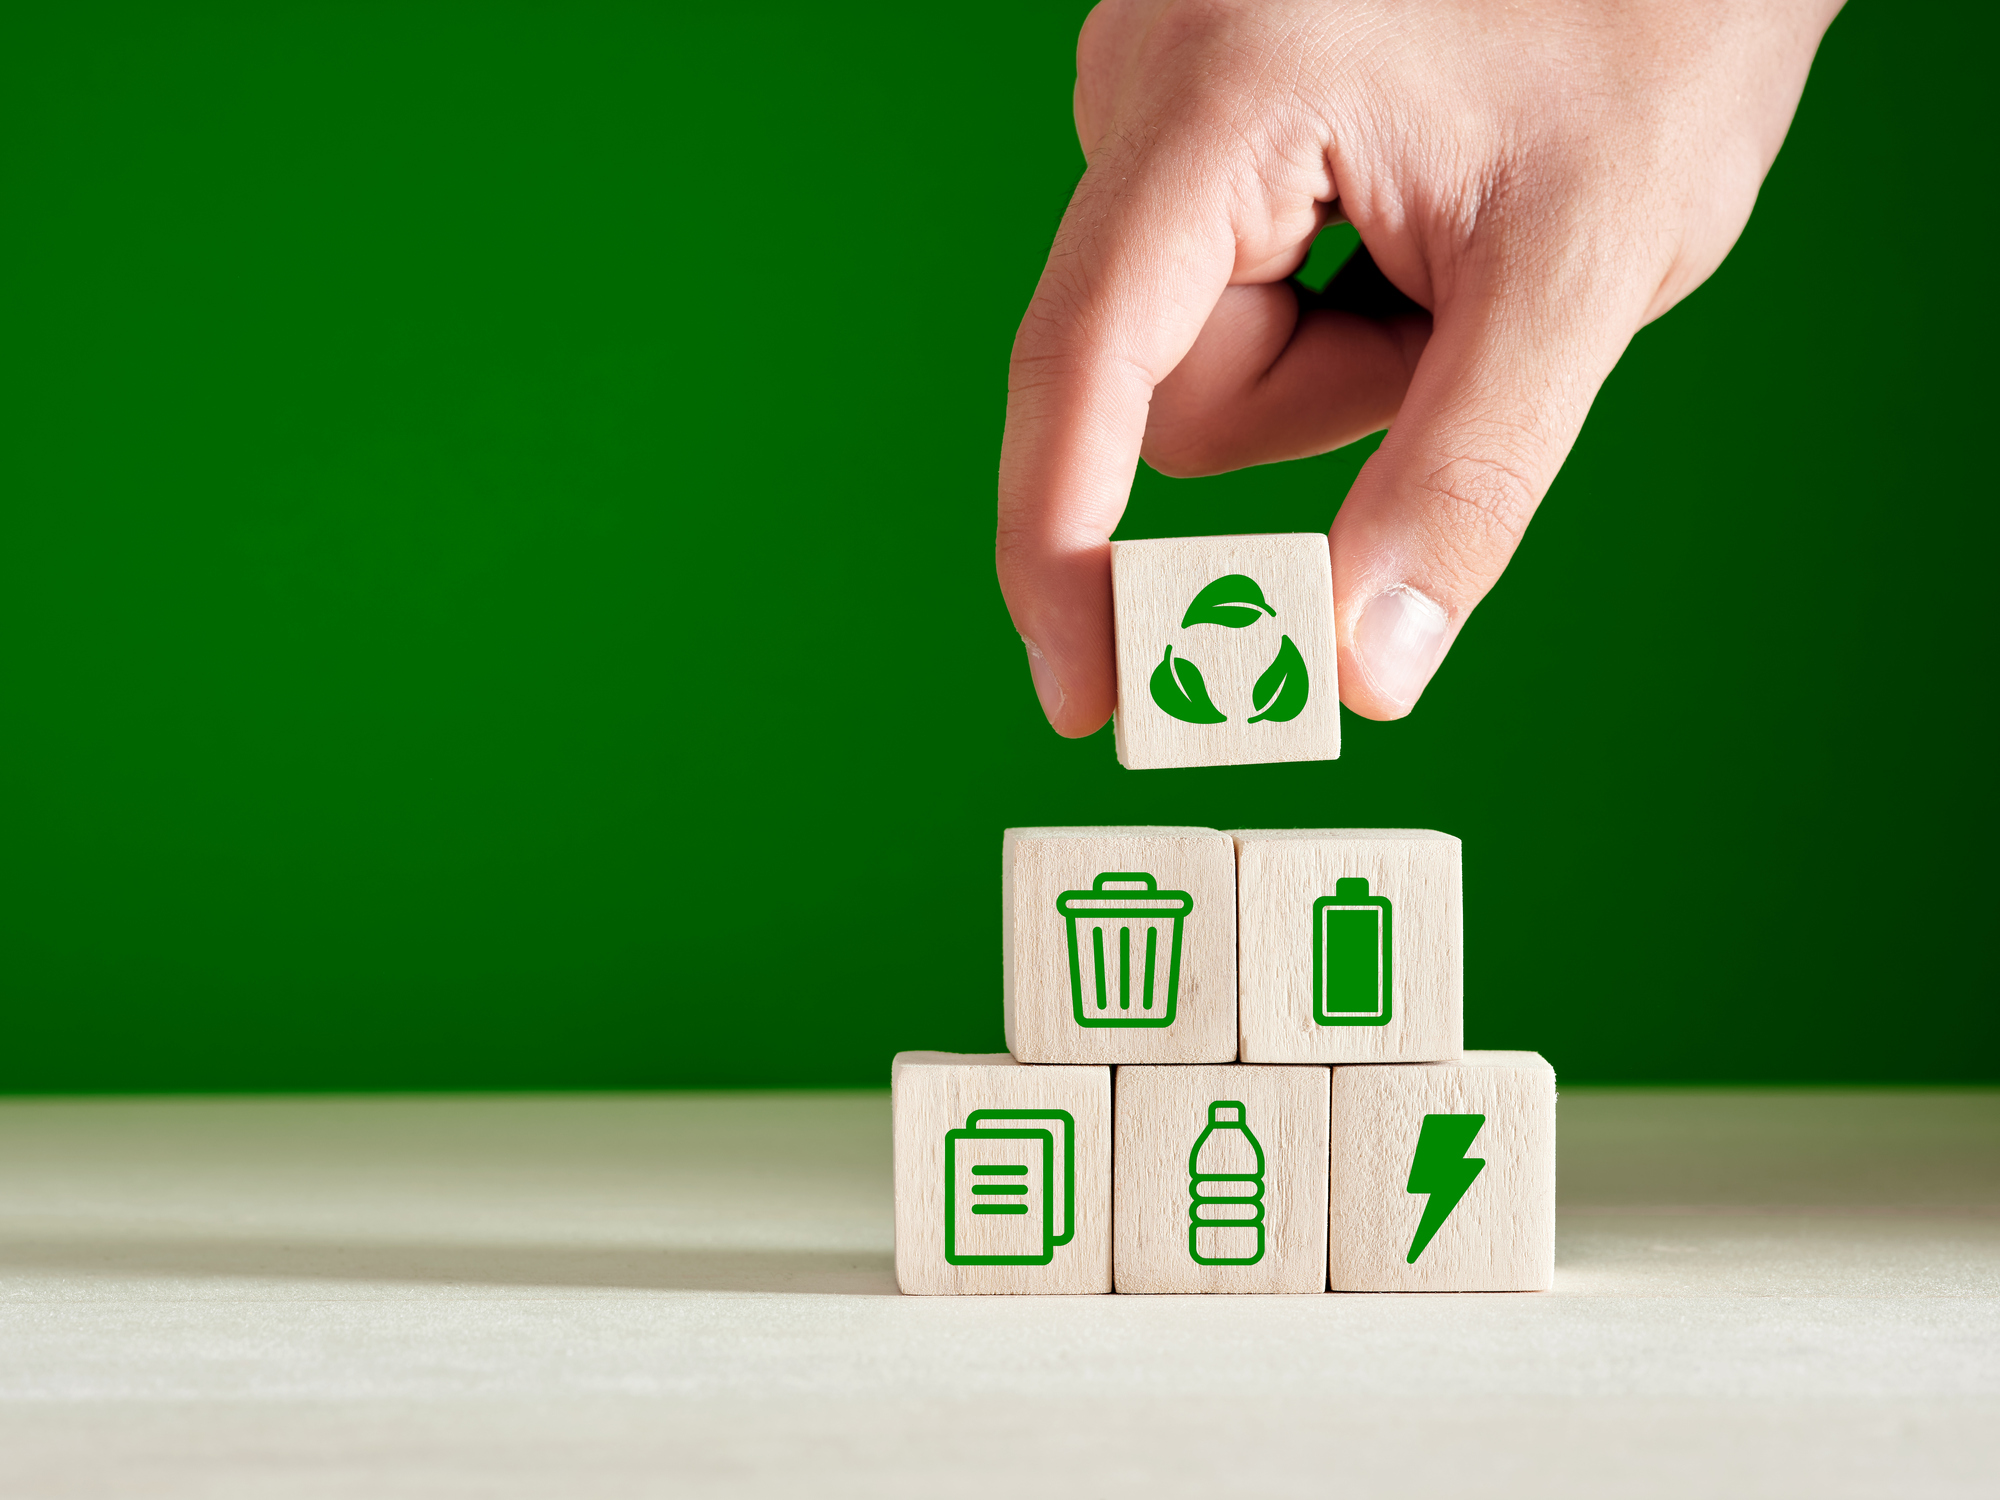 Recycling and environmental protection concept. Environment sustainable development. Hand puts recycling product material symbols on green background.